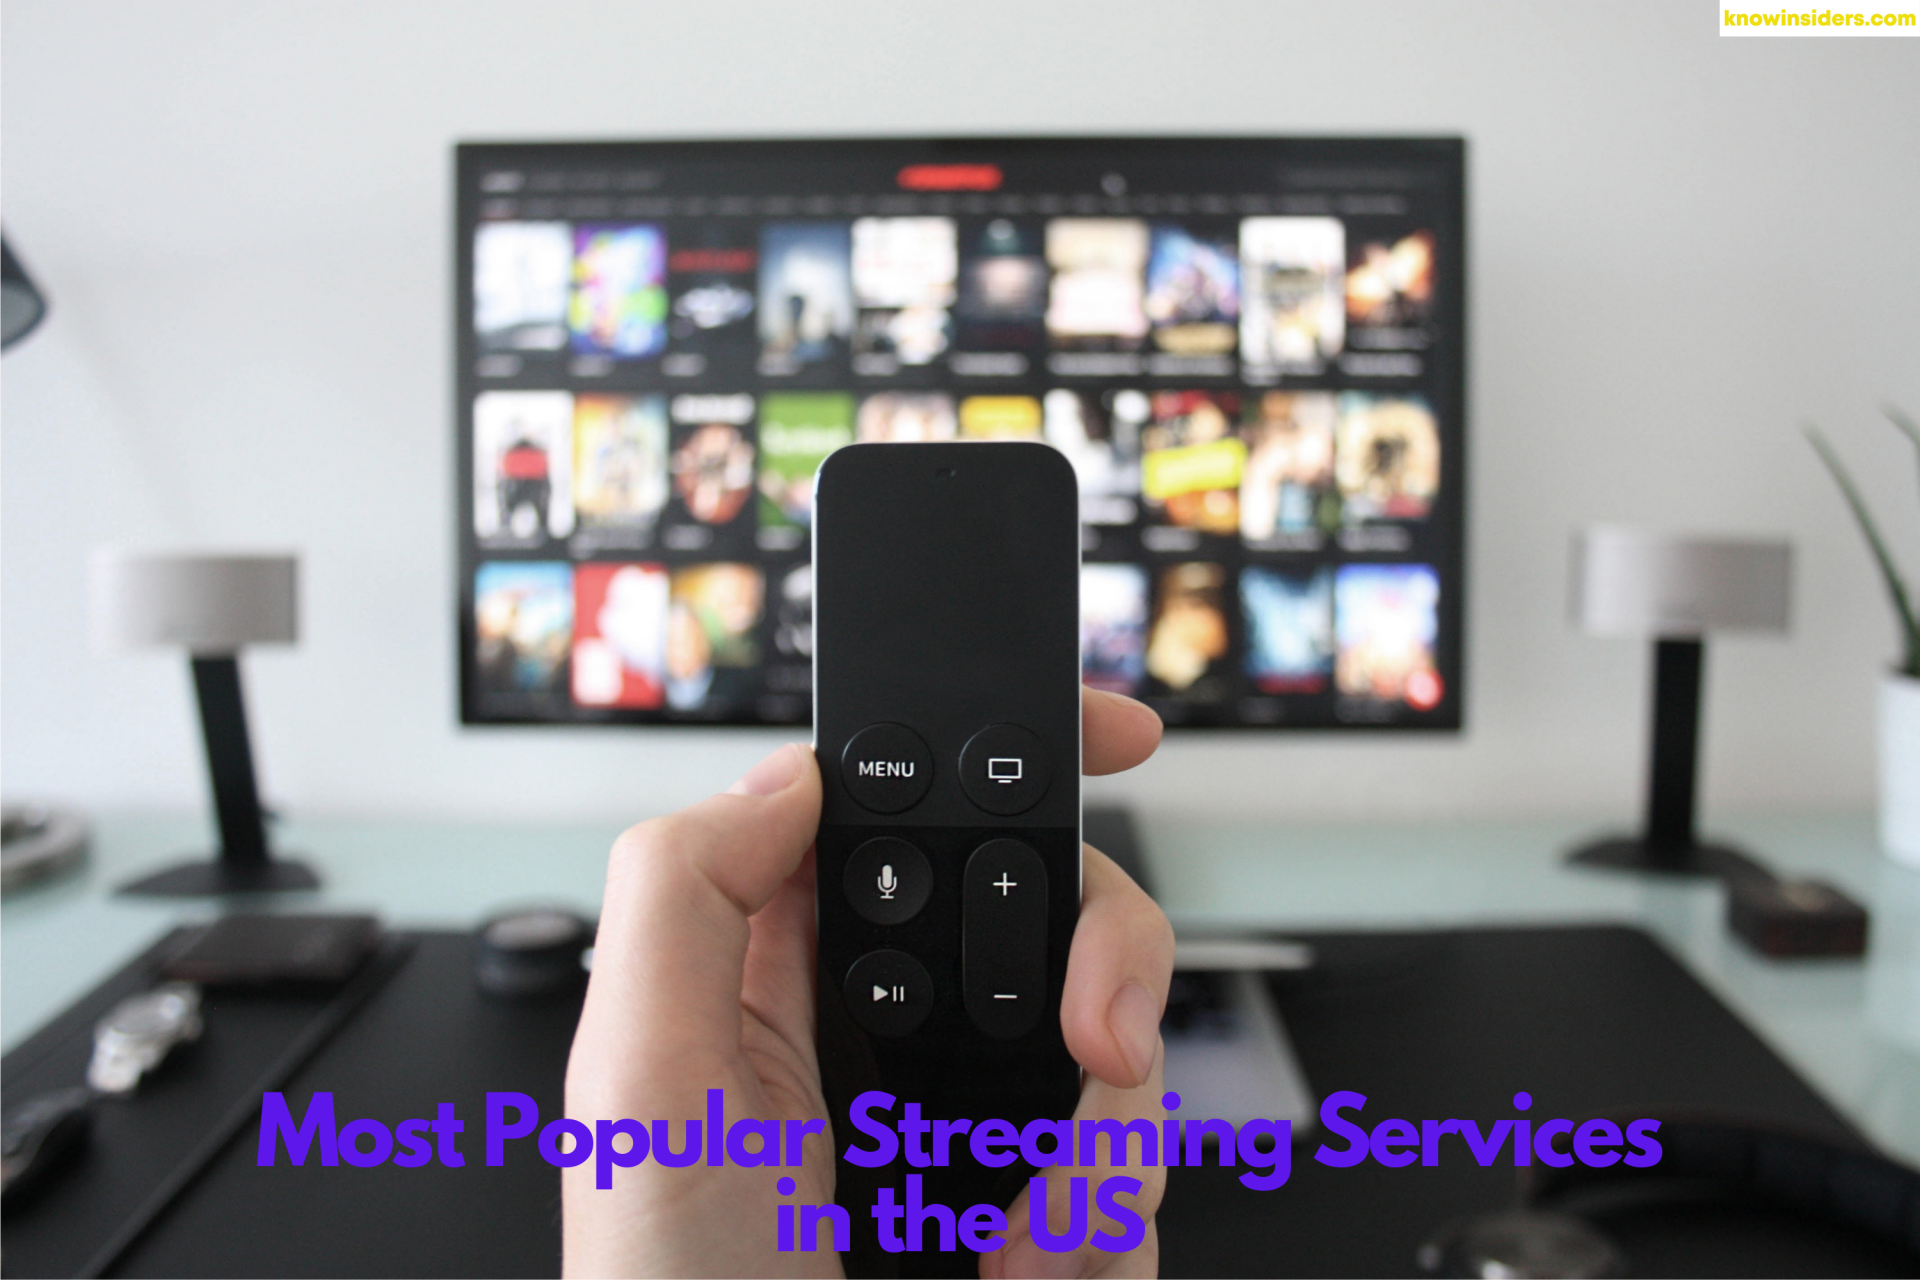 Top 5 Most Popular Streaming Services in the US